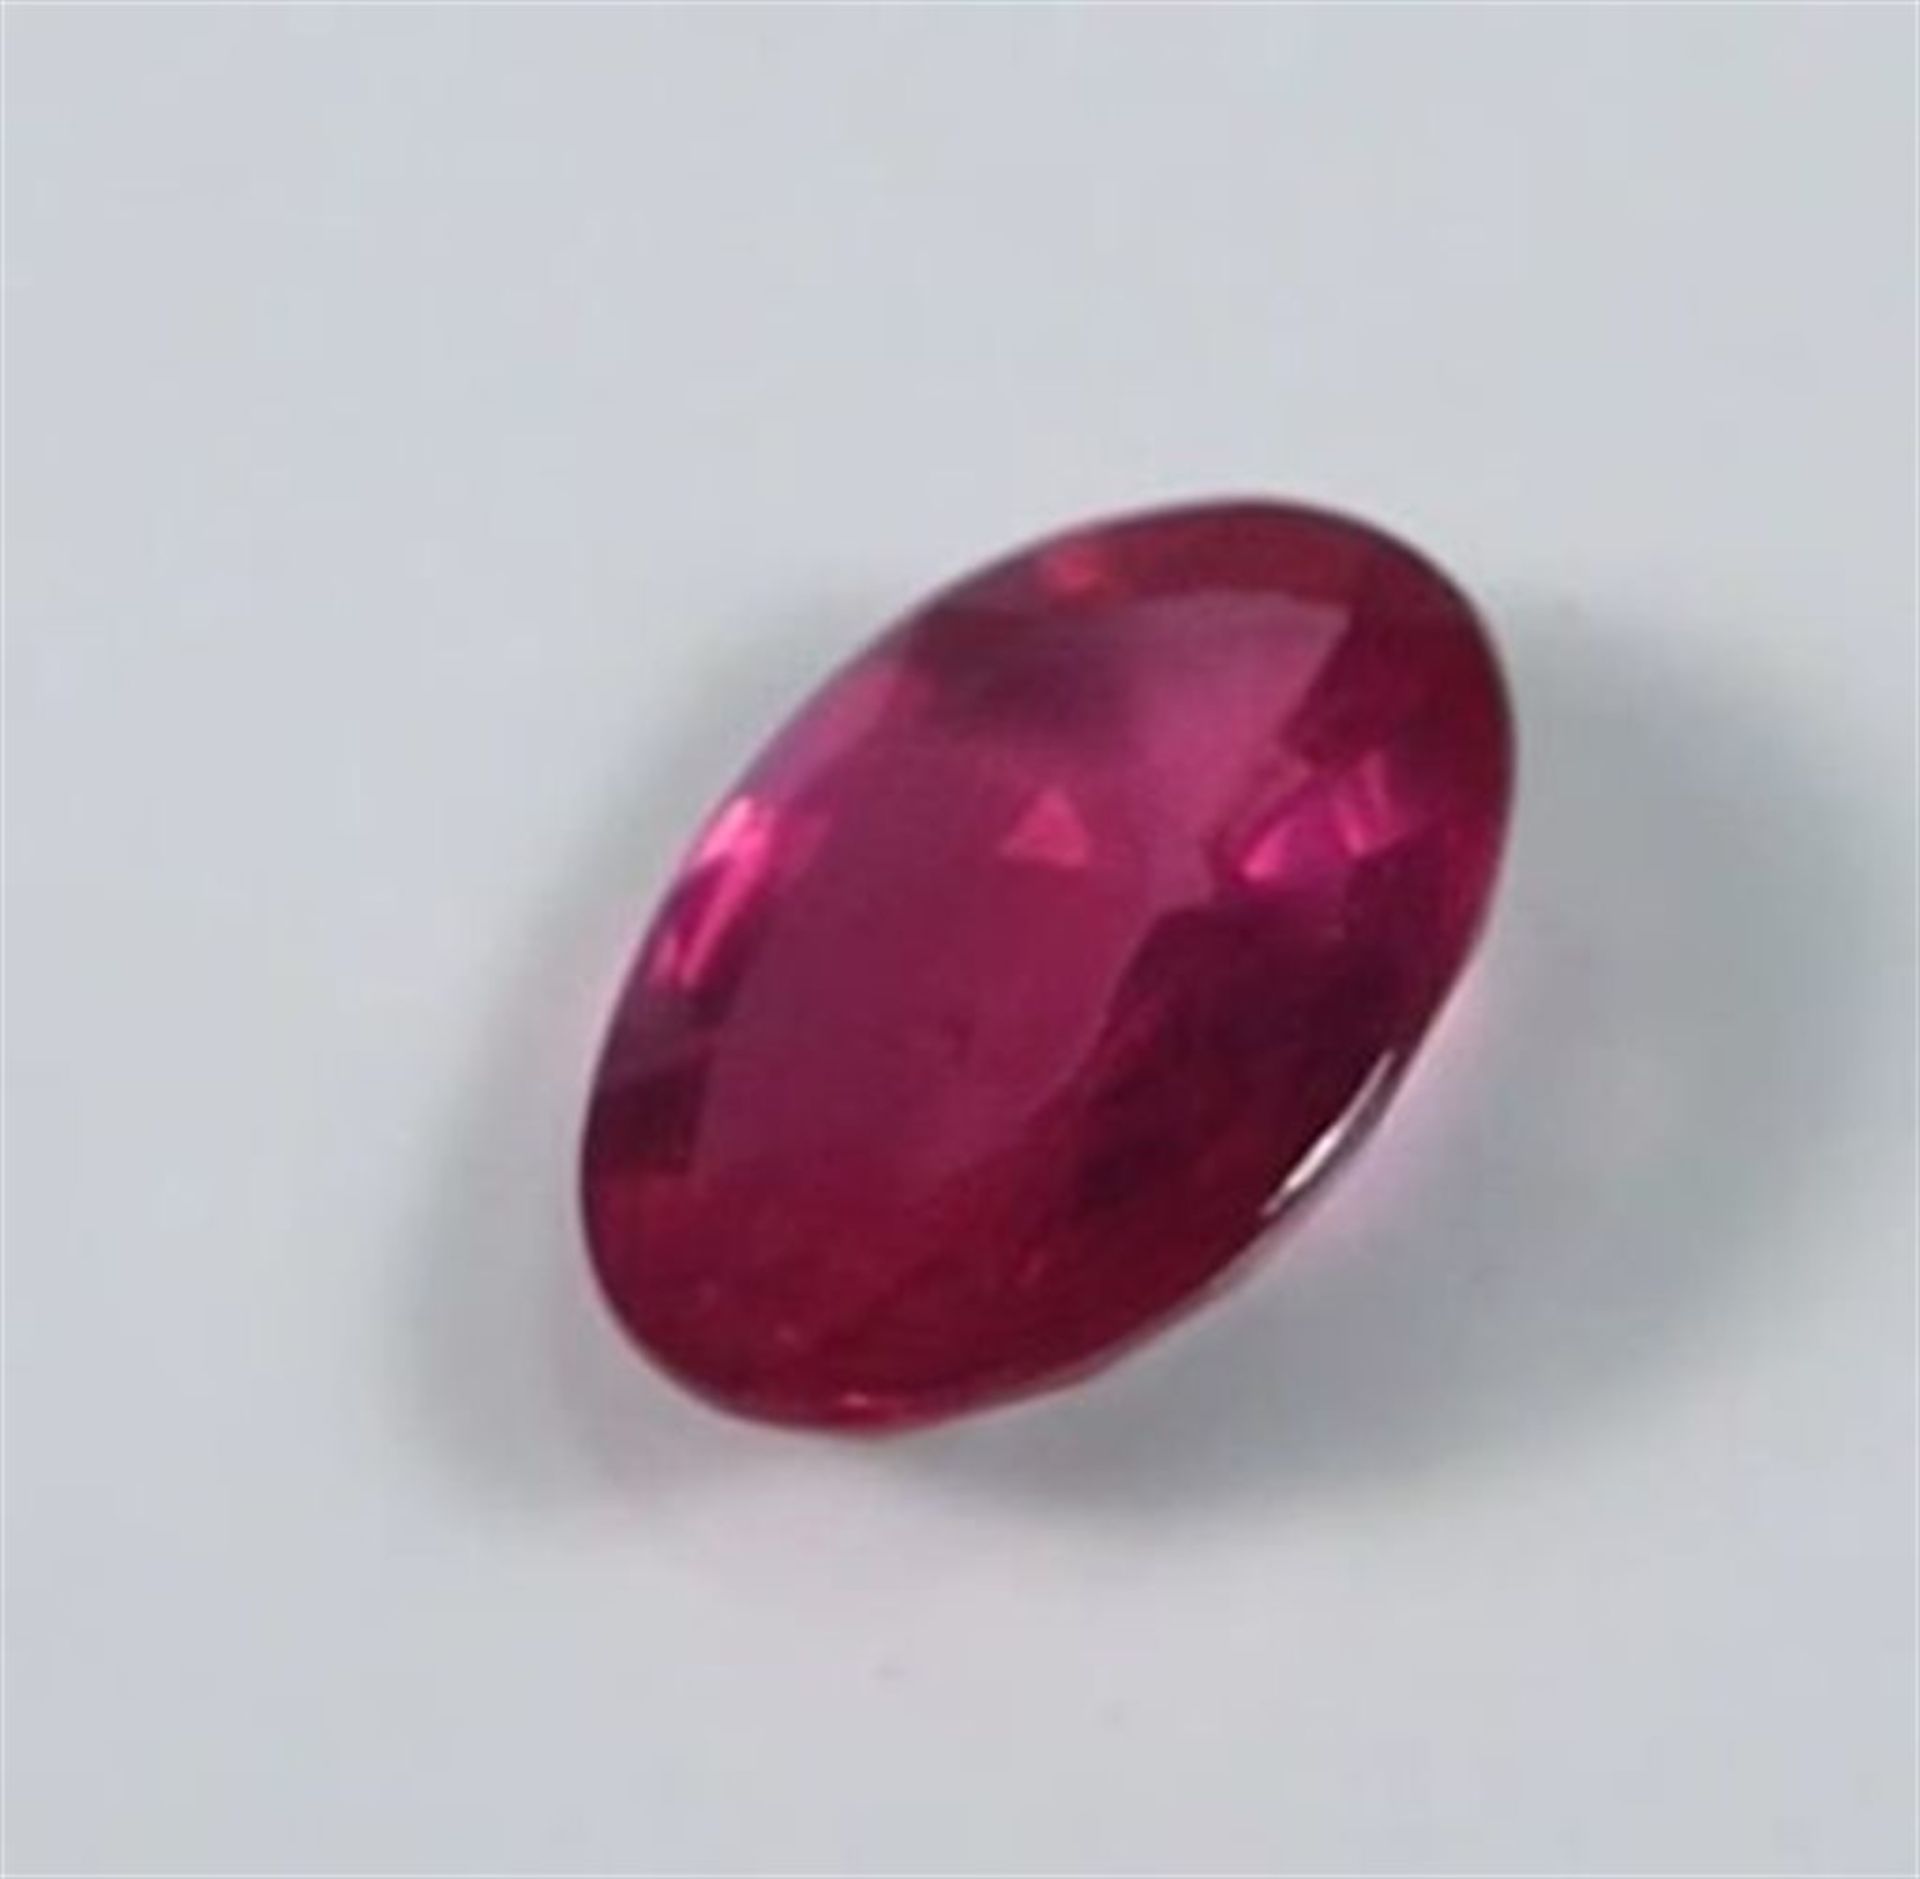 GIA Certified 1.22 ct. Untreated Ruby - BURMA - Image 8 of 10